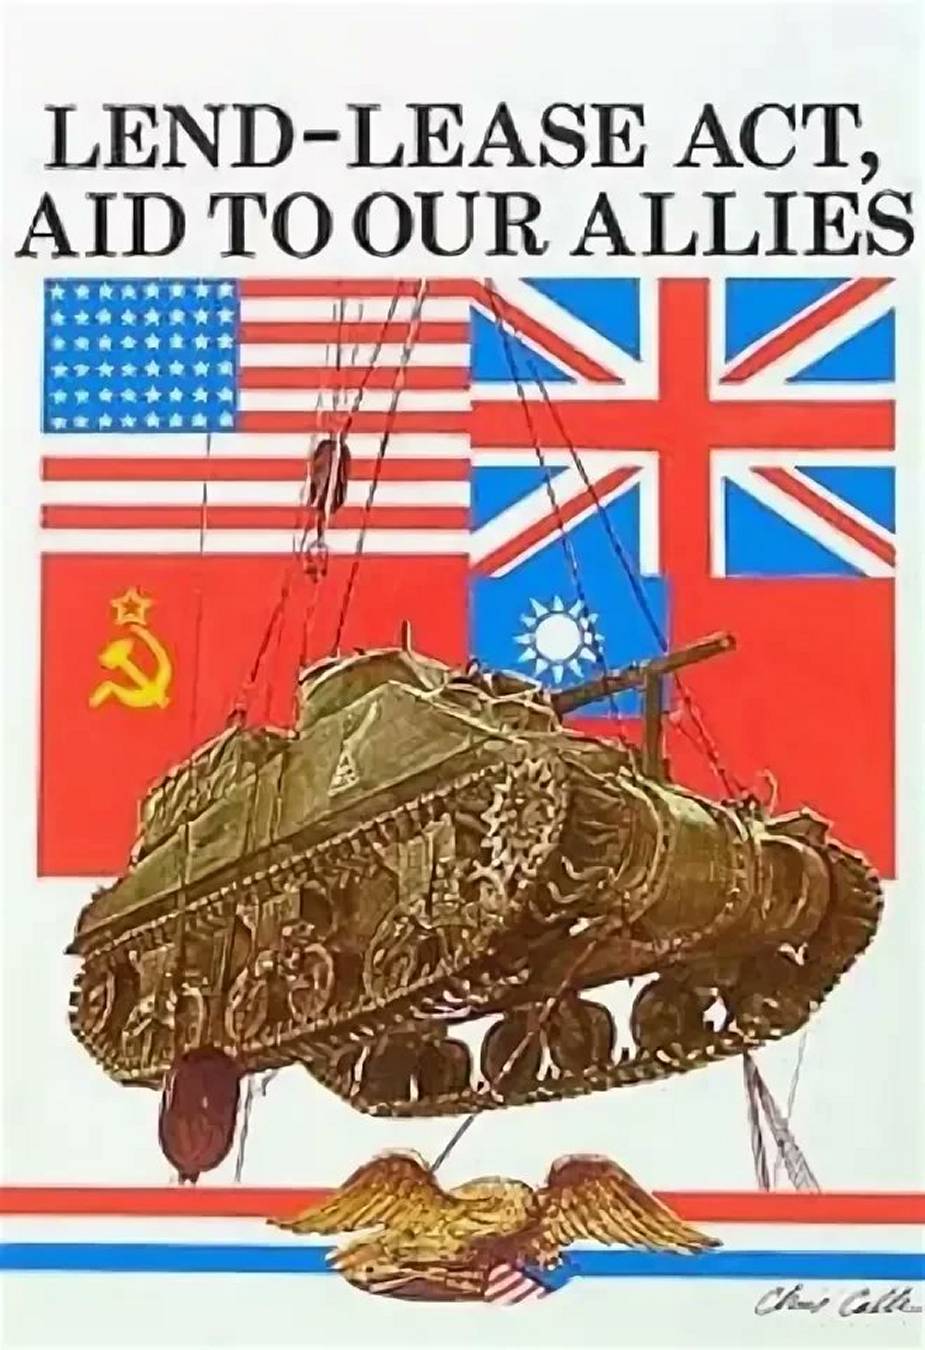 Vintage poster illustrating the Lend-Lease Act, featuring the flags of the U.S., the U.K., the Soviet Union, and China, along with an image of a military tank.